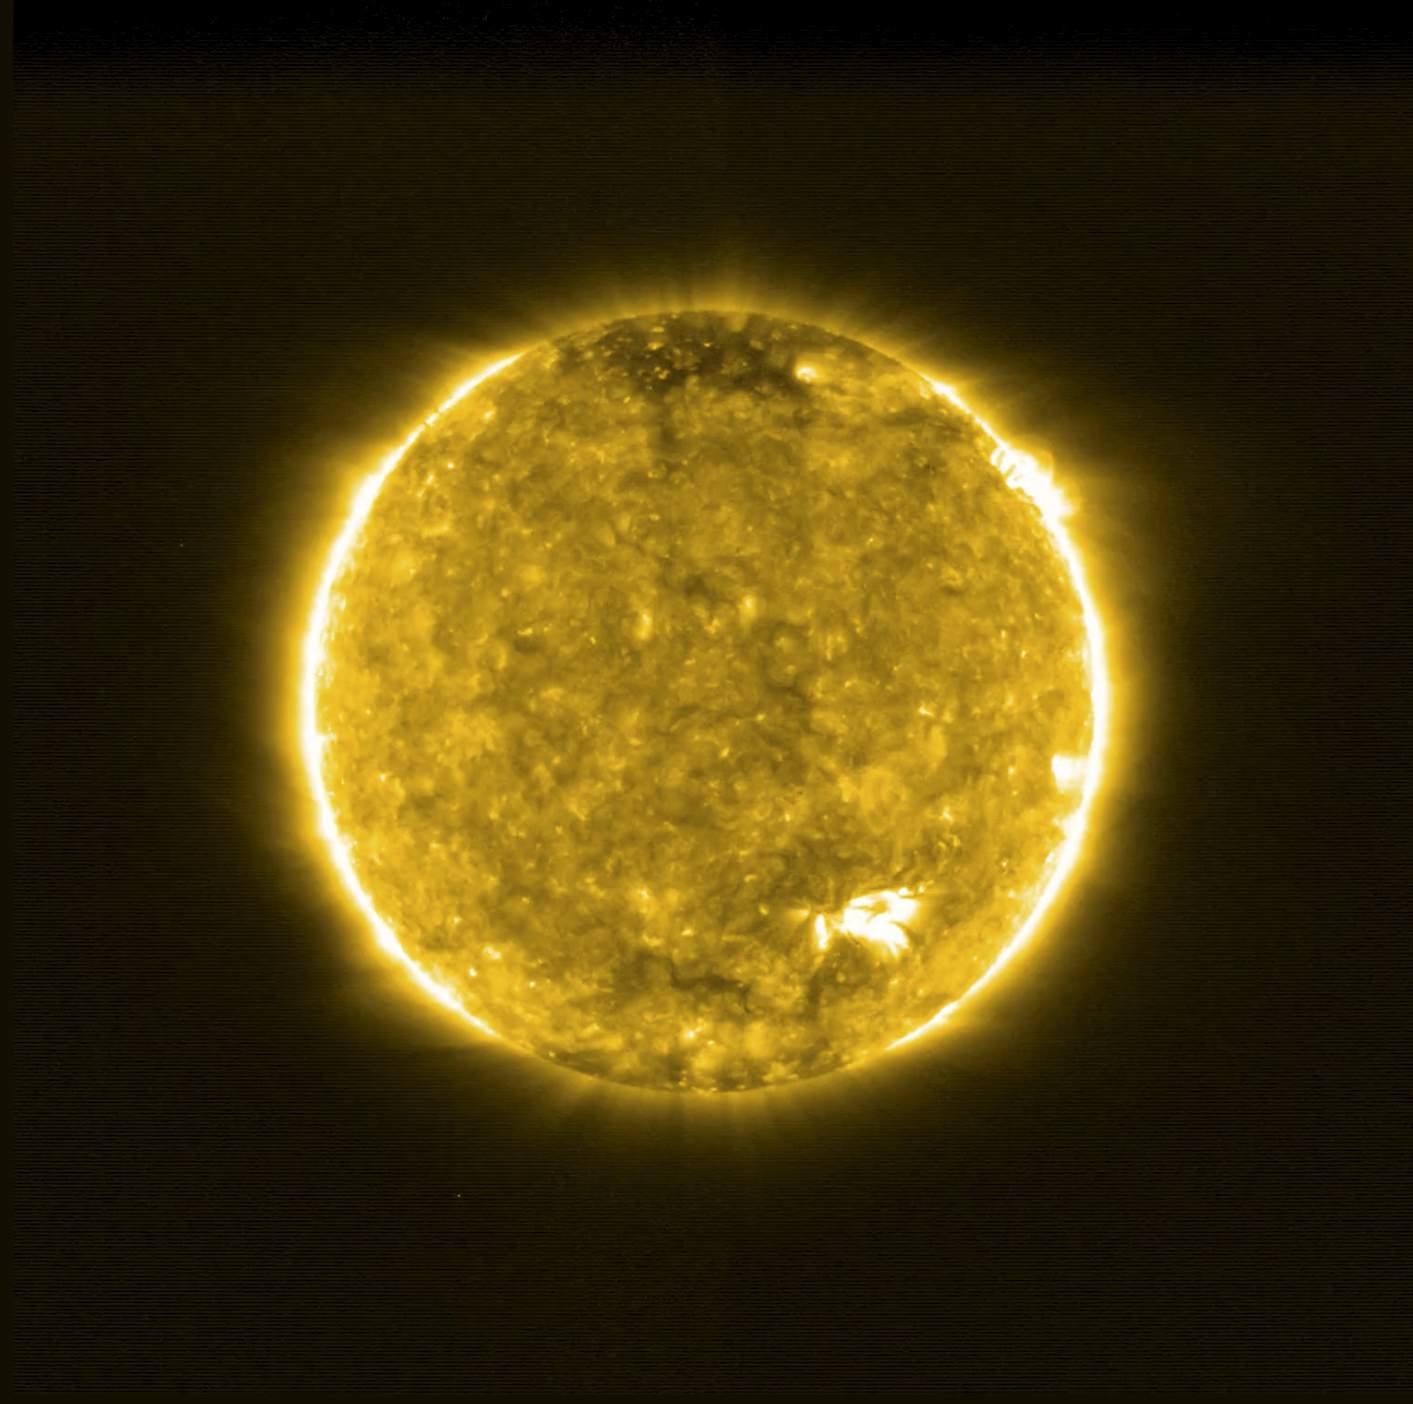 Spacecraft snaps closest pictures of sun, 'campfires' abound